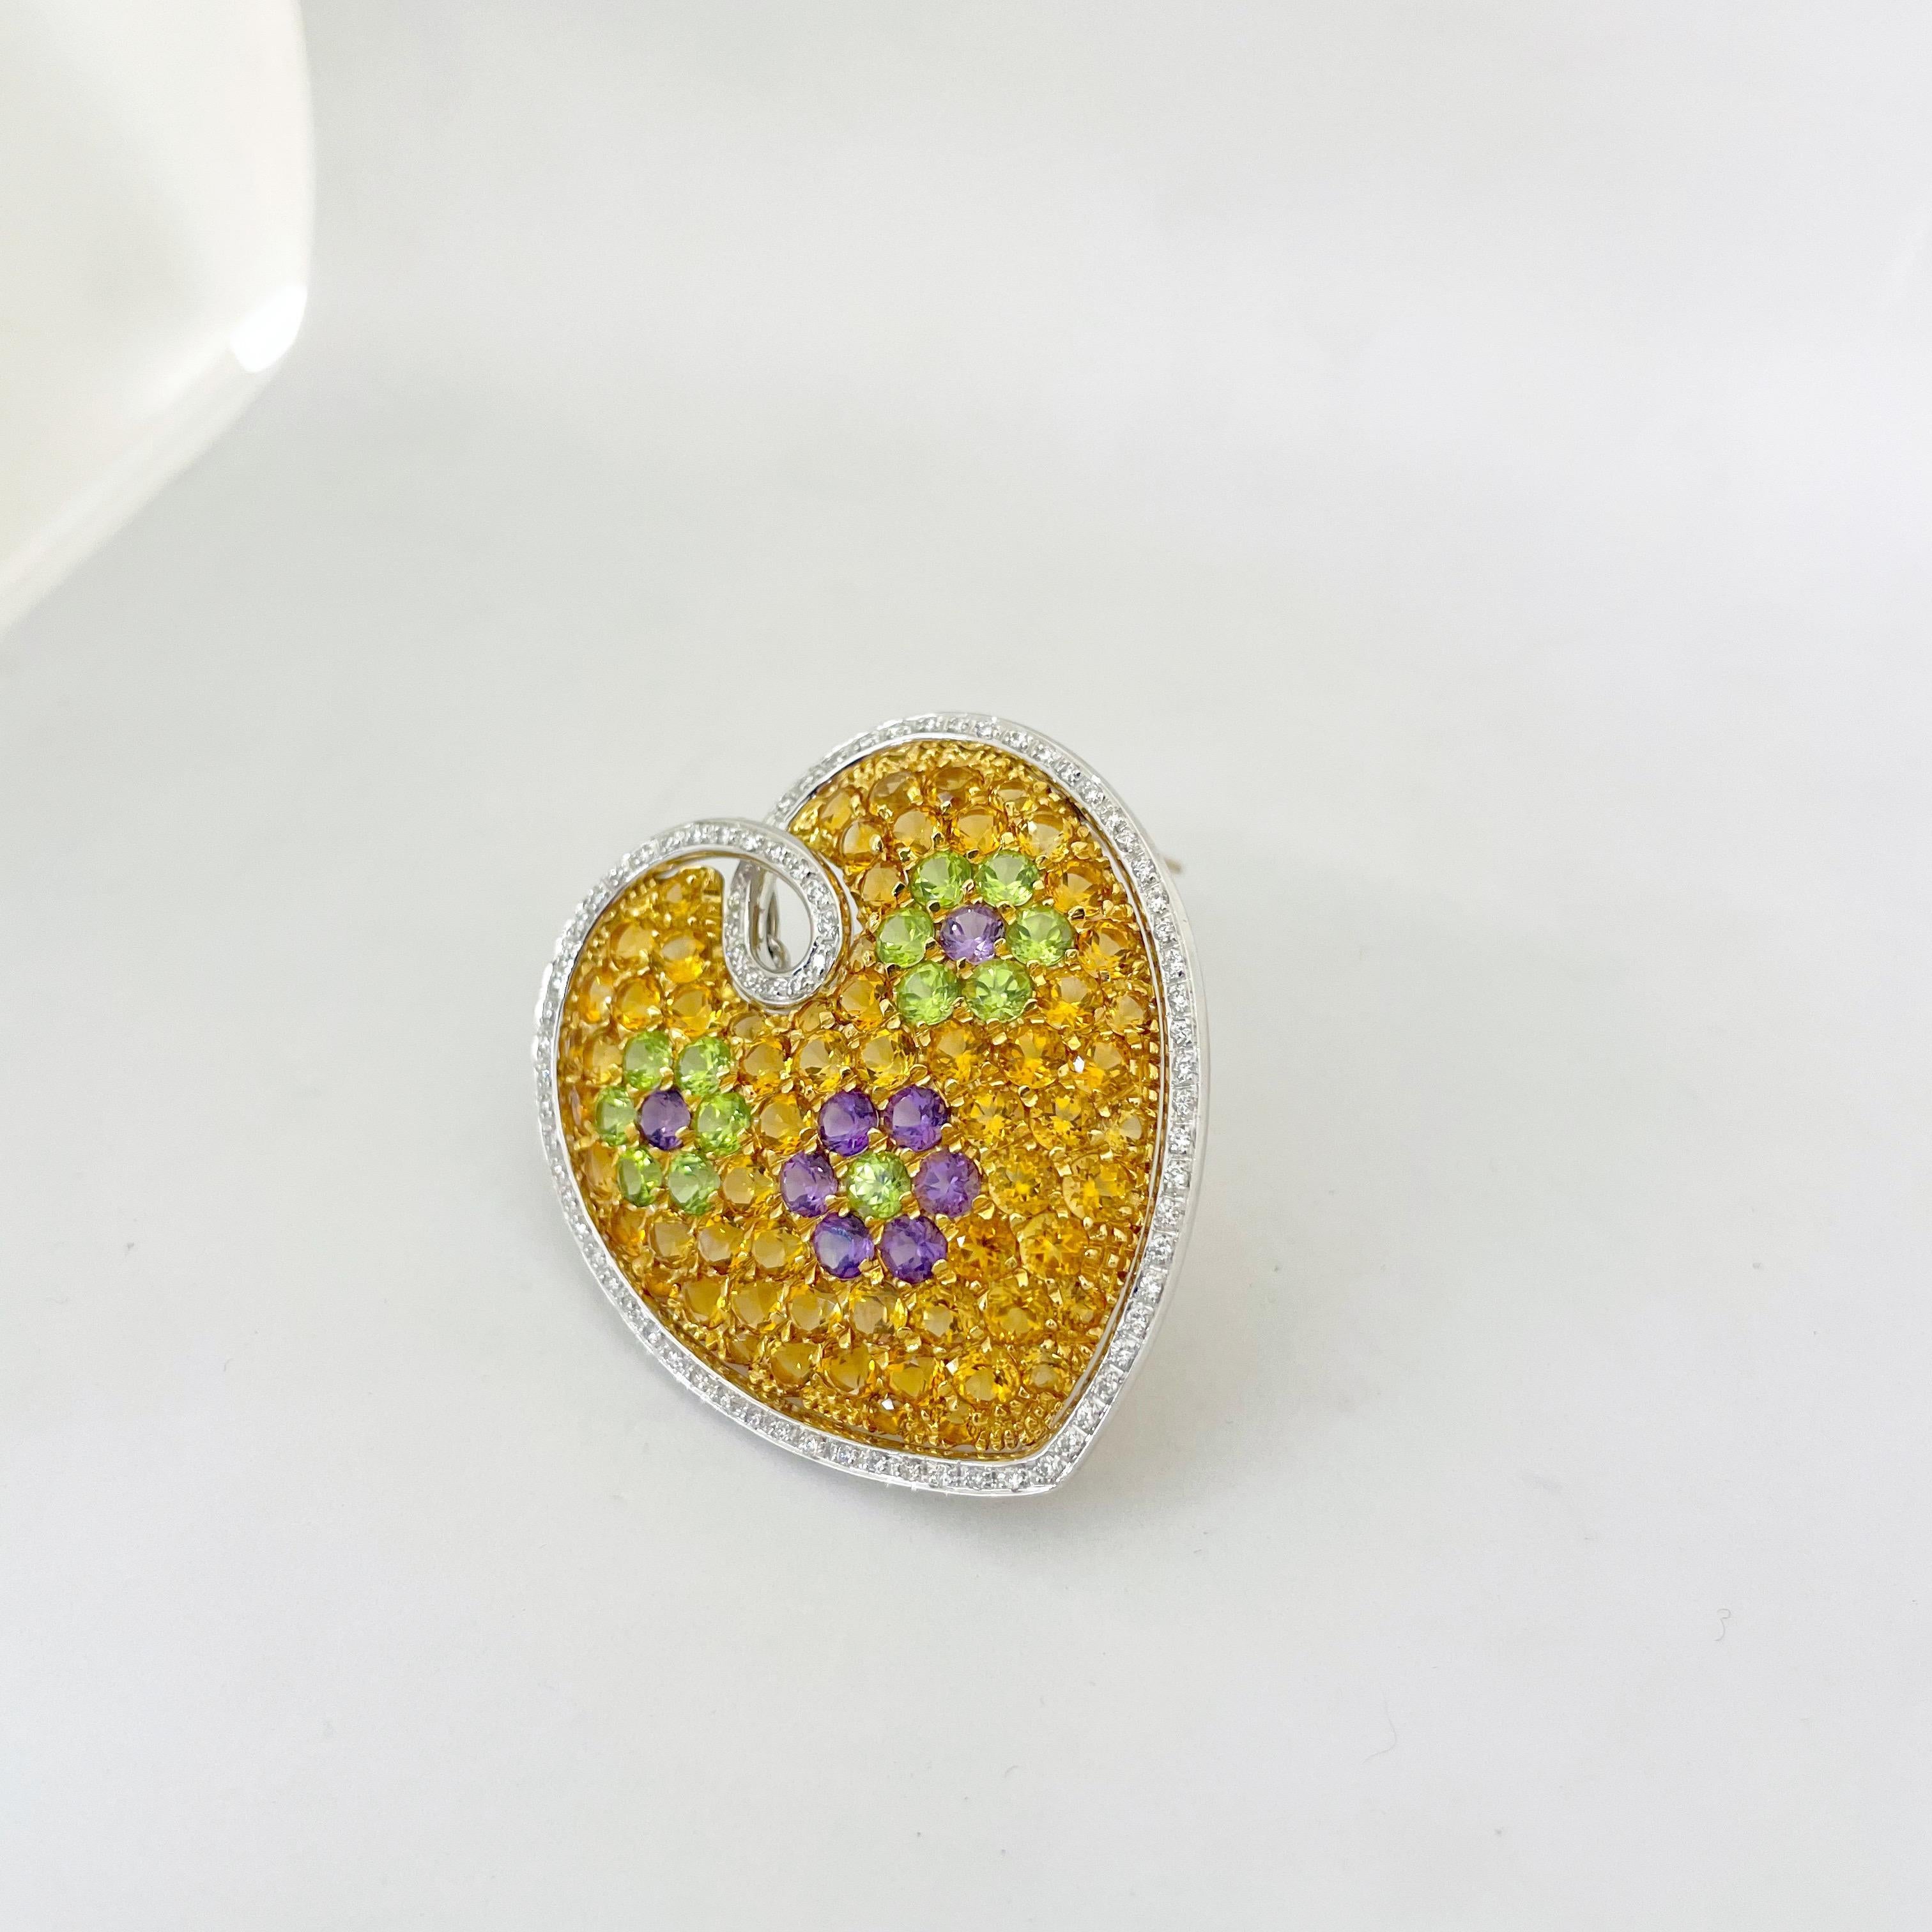 Round Cut 18KT Yellow and White Gold Semi-Precious Stone Puffed Heart Brooch with Diamonds For Sale